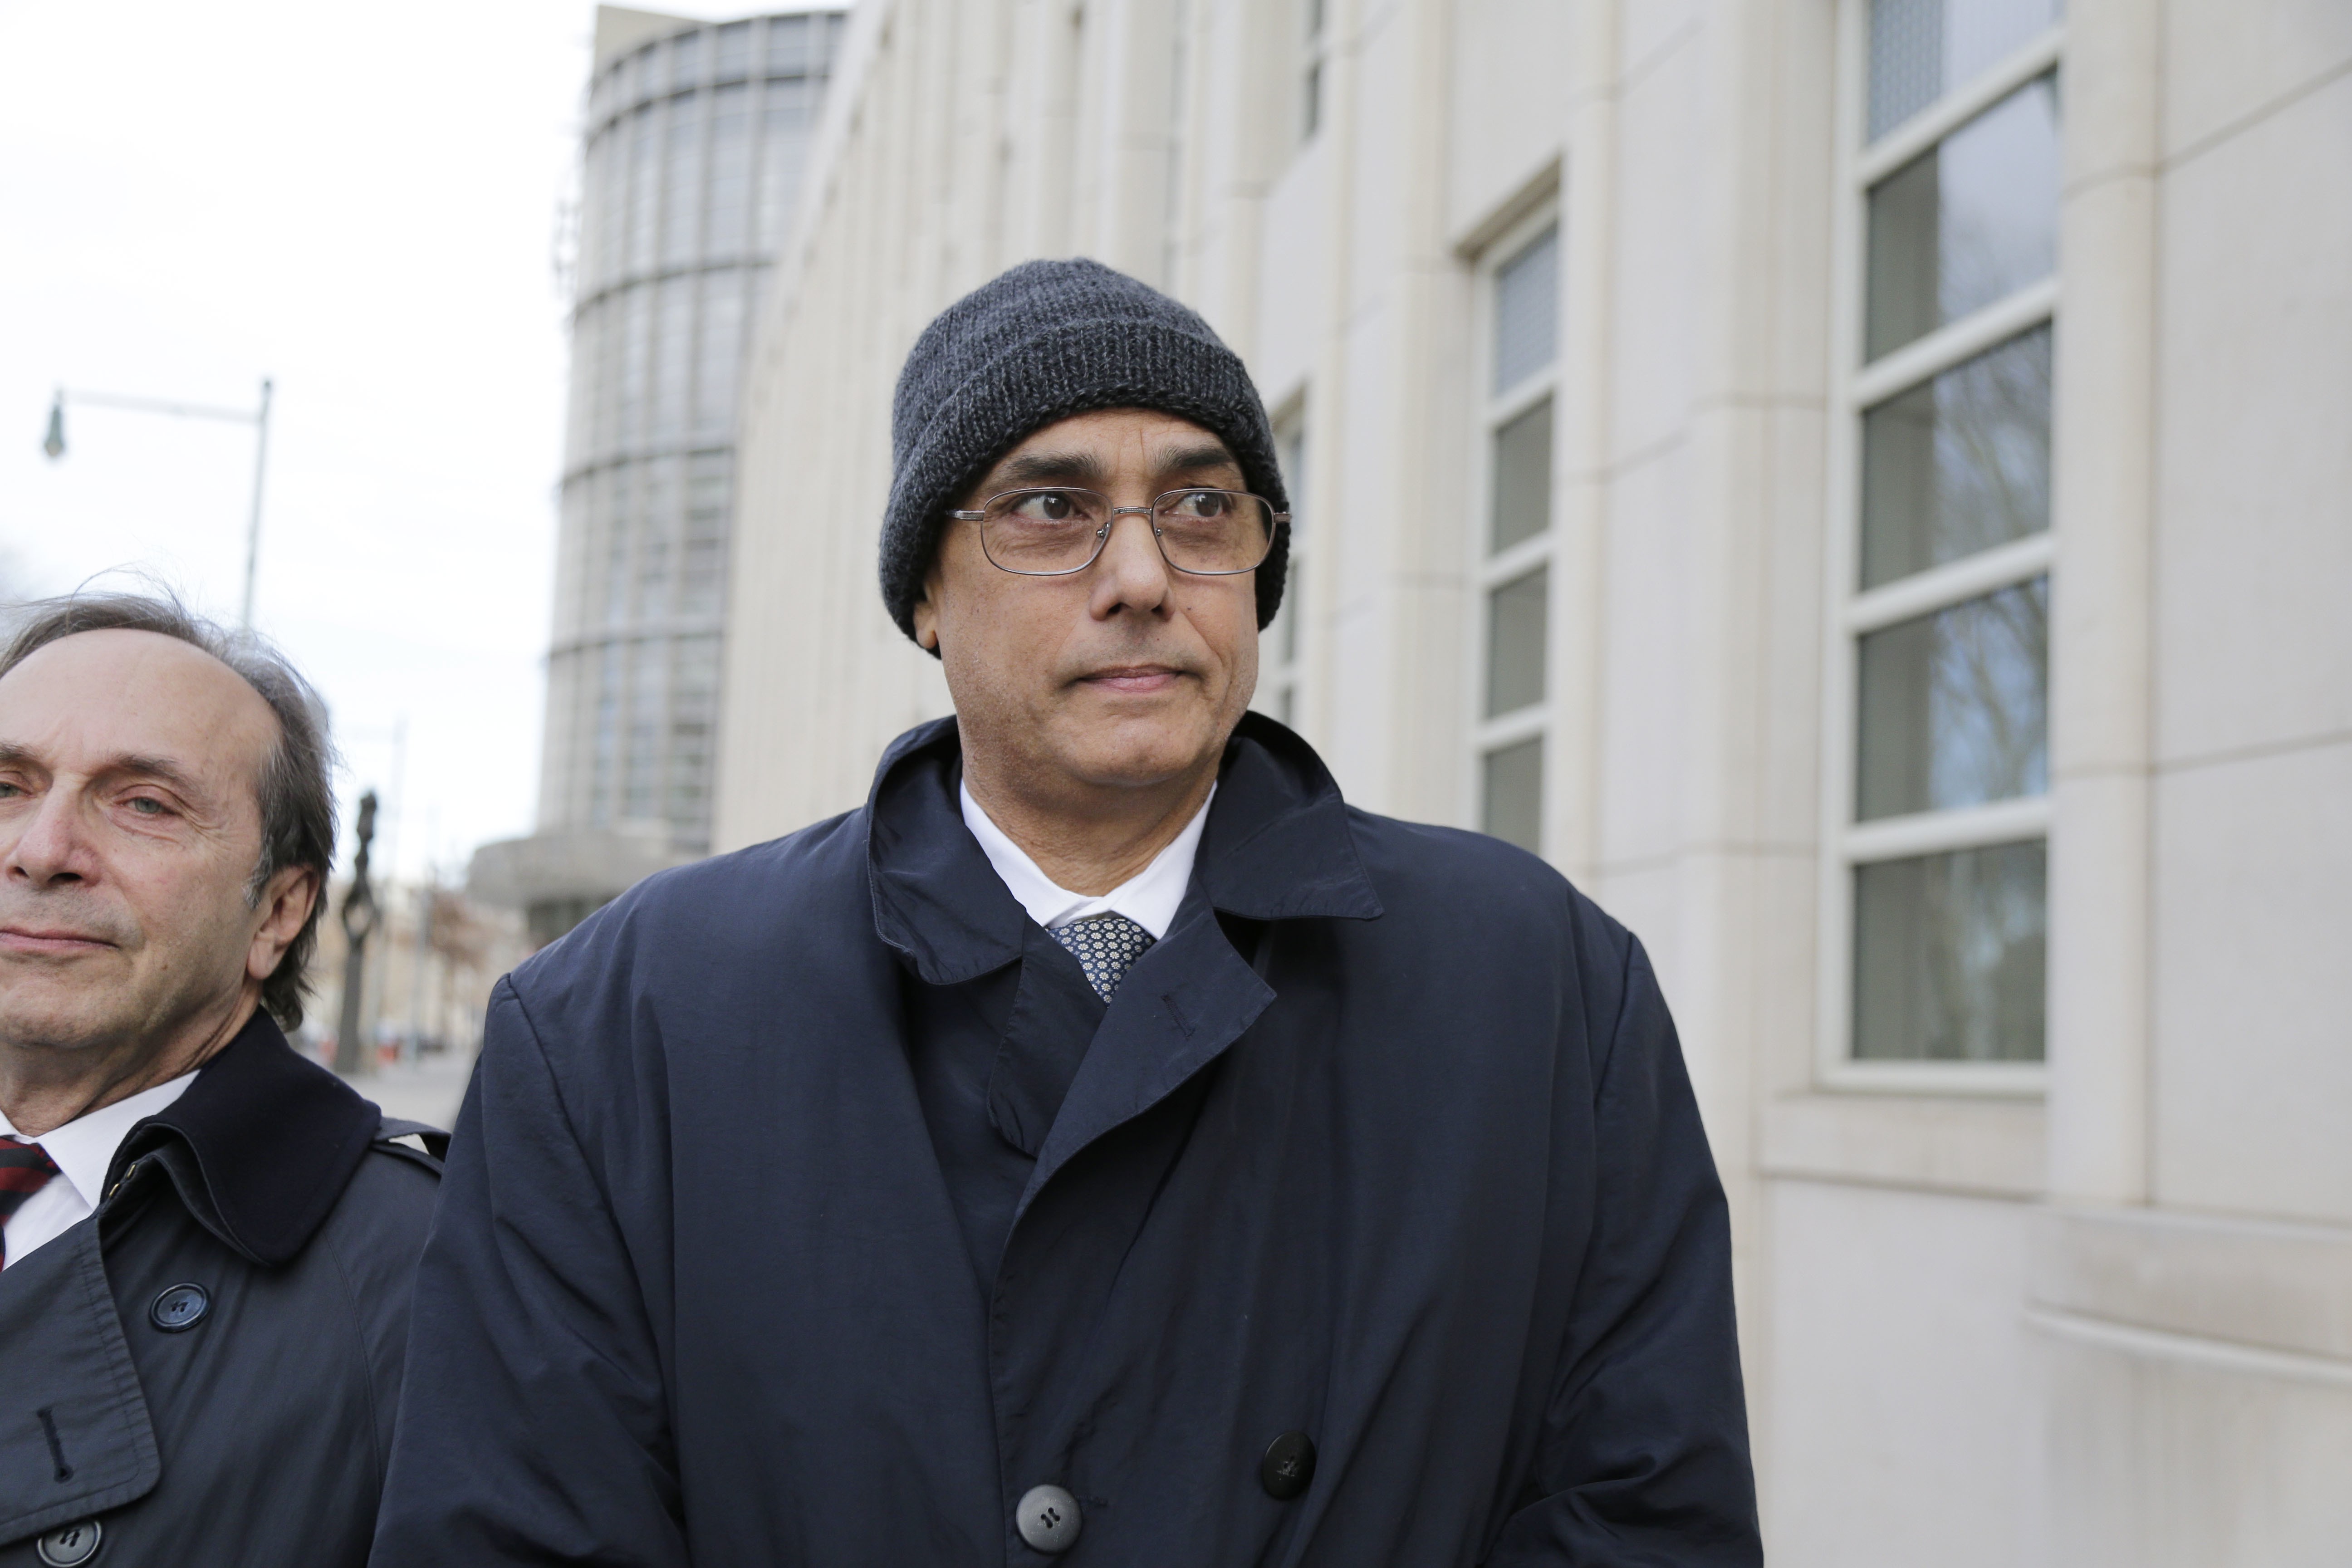 Manuel Burga leaves federal court in Brooklyn, New York, on Tuesday. The former South American soccer official, who was charged in a US trial stemming from the Fifa bribery scandal, was acquitted of a corruption charge. Two others were convicted in the case last week. Photo: AP